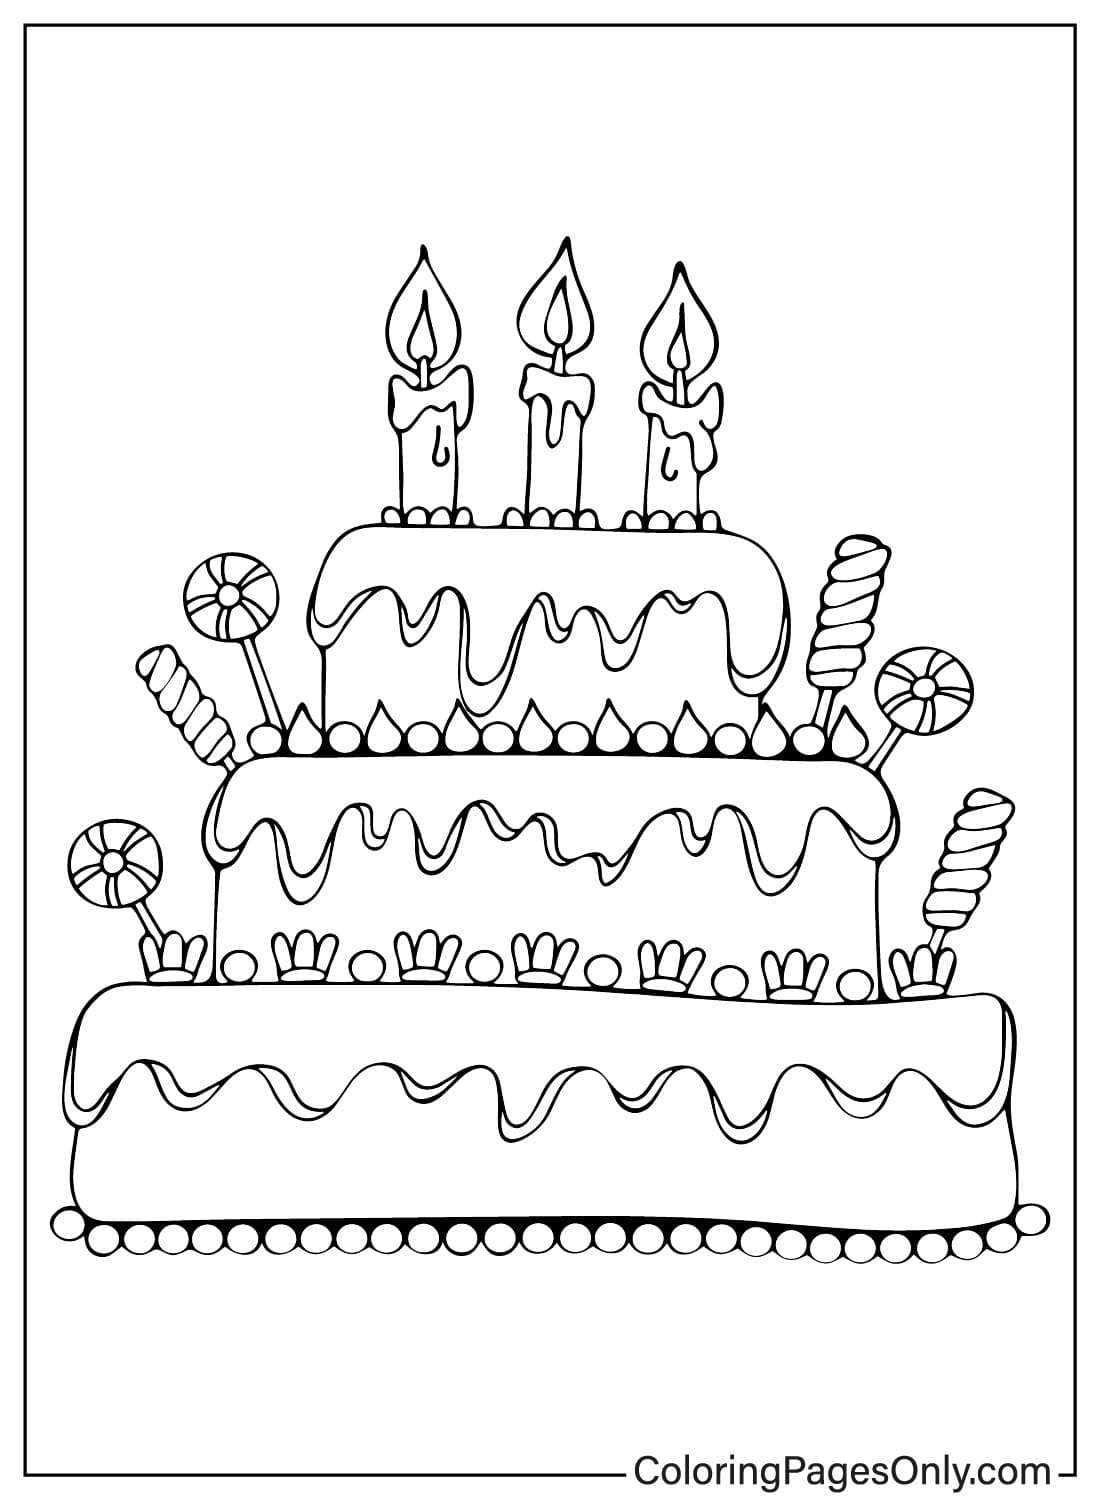 22 Free Printable Birthday Cake Coloring Pages